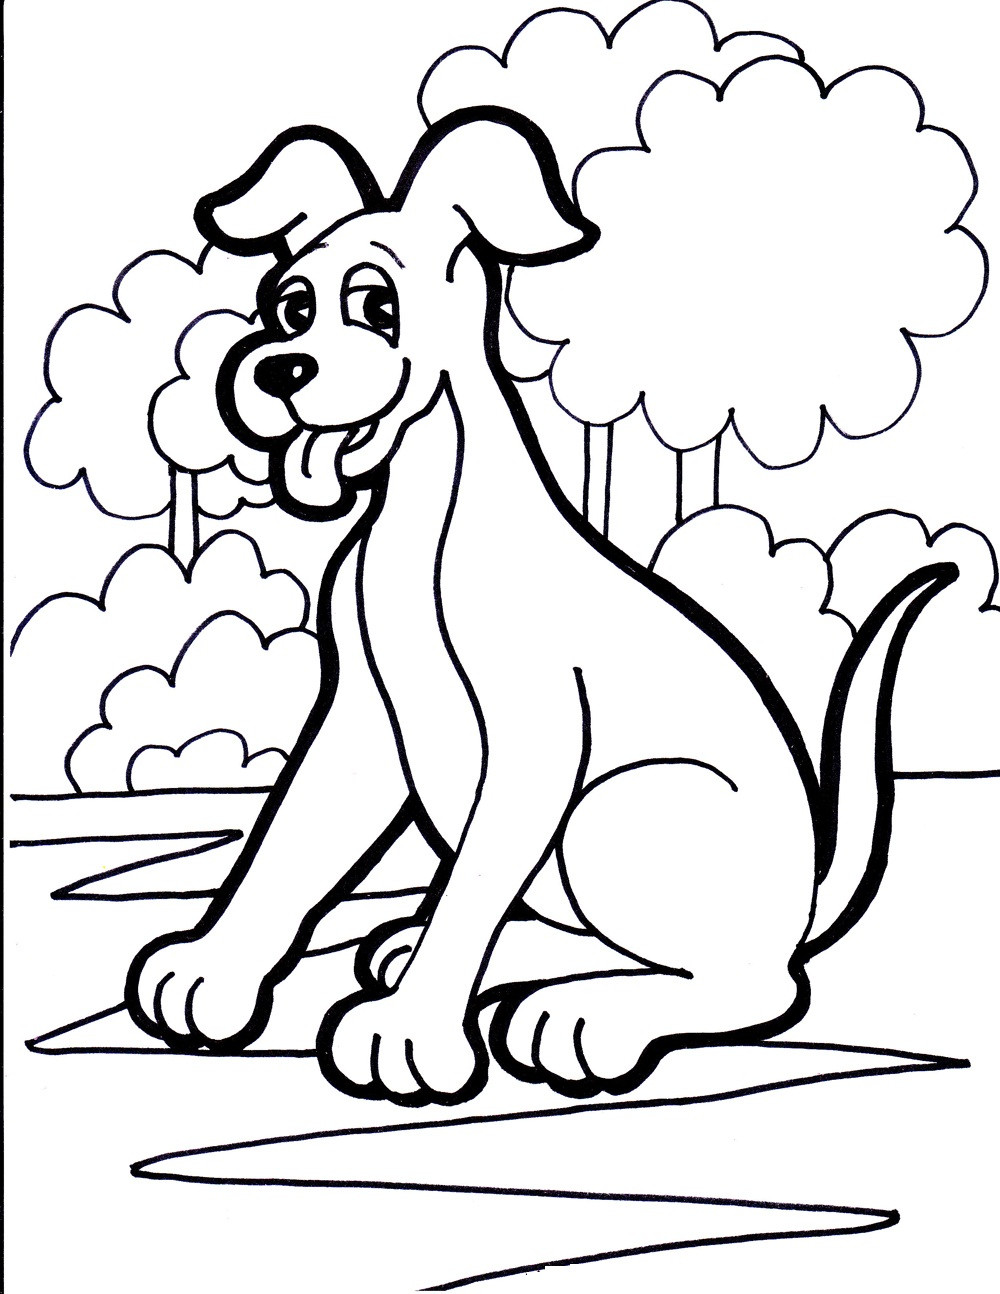 Free Printable Puppy Coloring Pages
 Free Printable Dog Coloring Pages For Kids